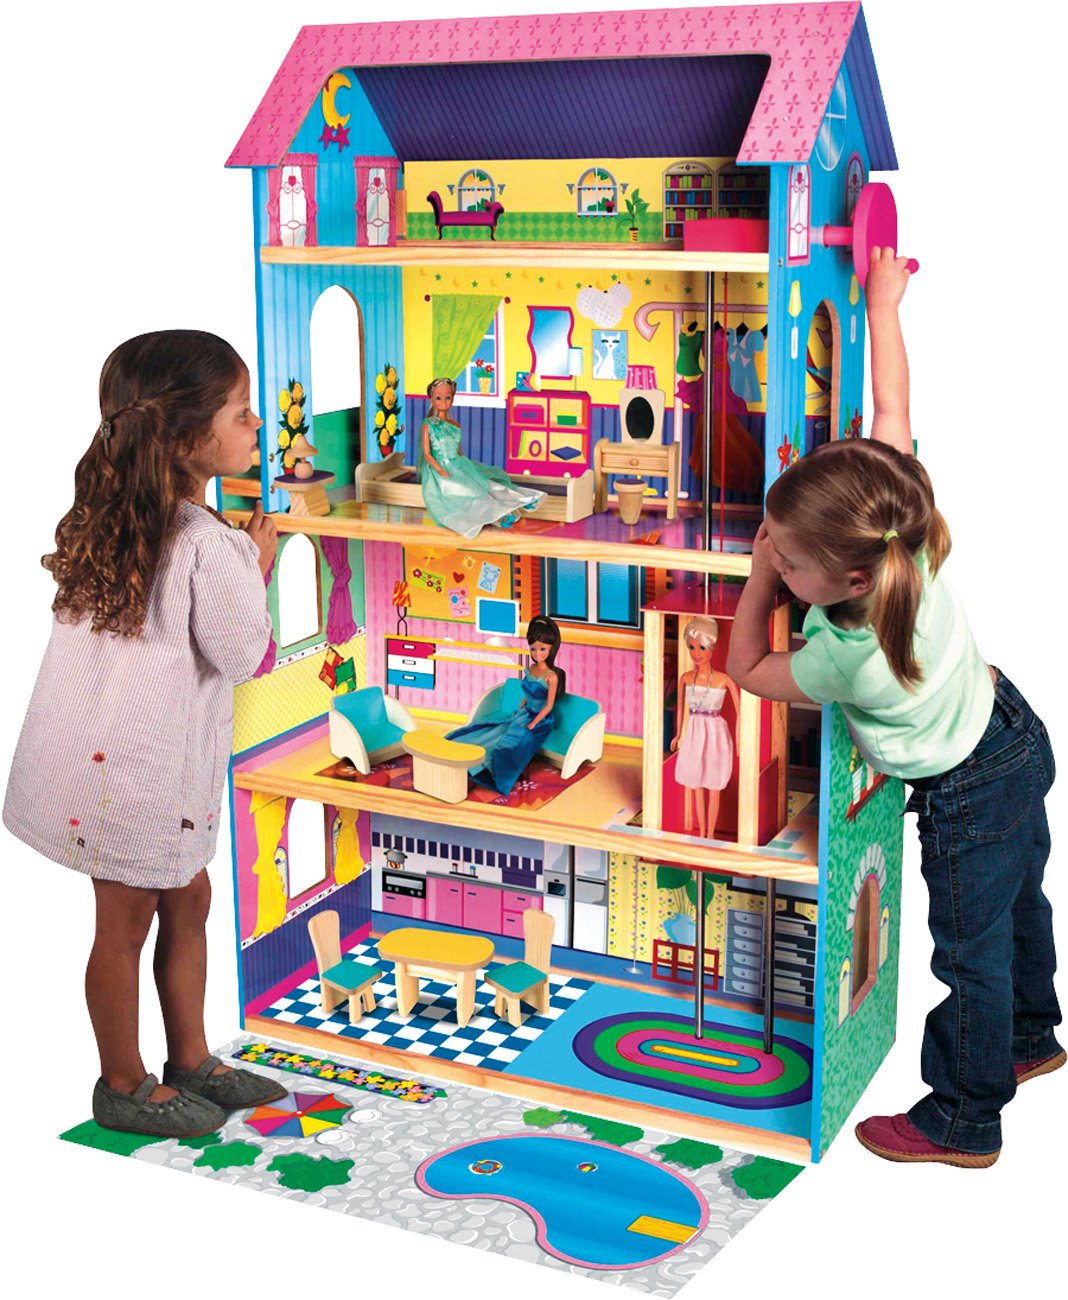 wooden dollhouse with elevator